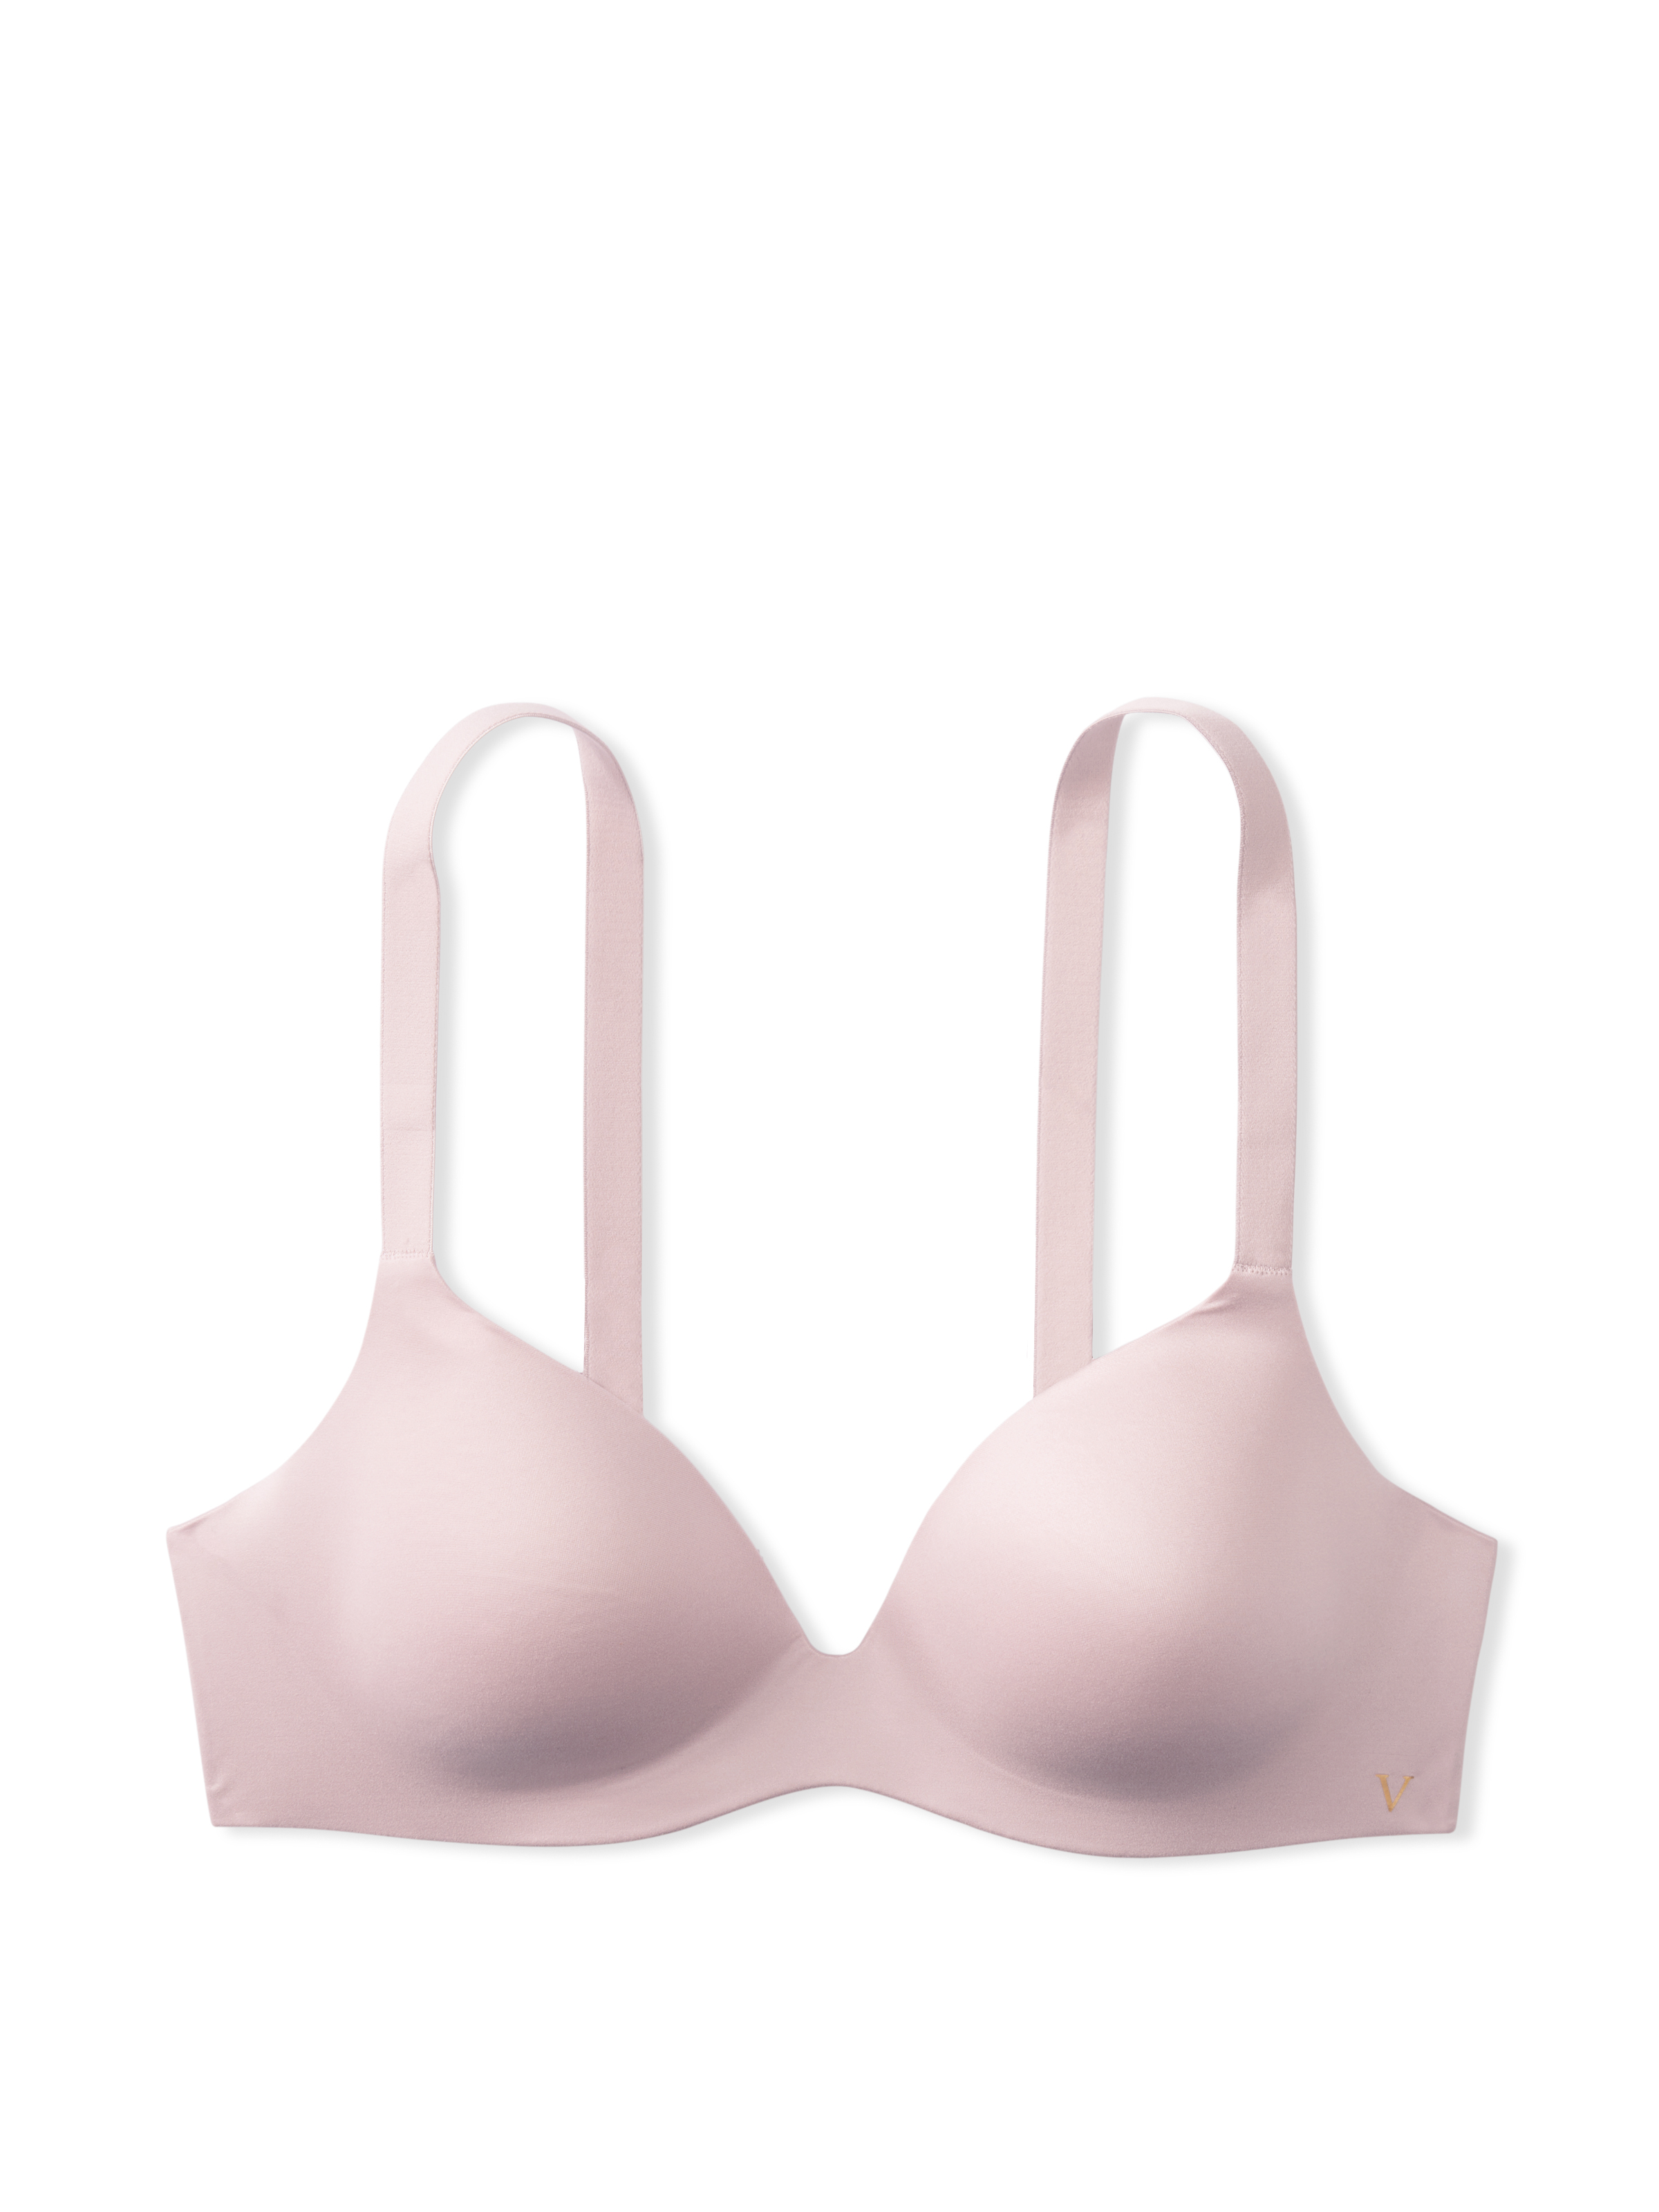 The VS Bare Infinity Flex Bra offers the best of both worlds. The  innovative gel wire lifts and supports while inventive technology gives